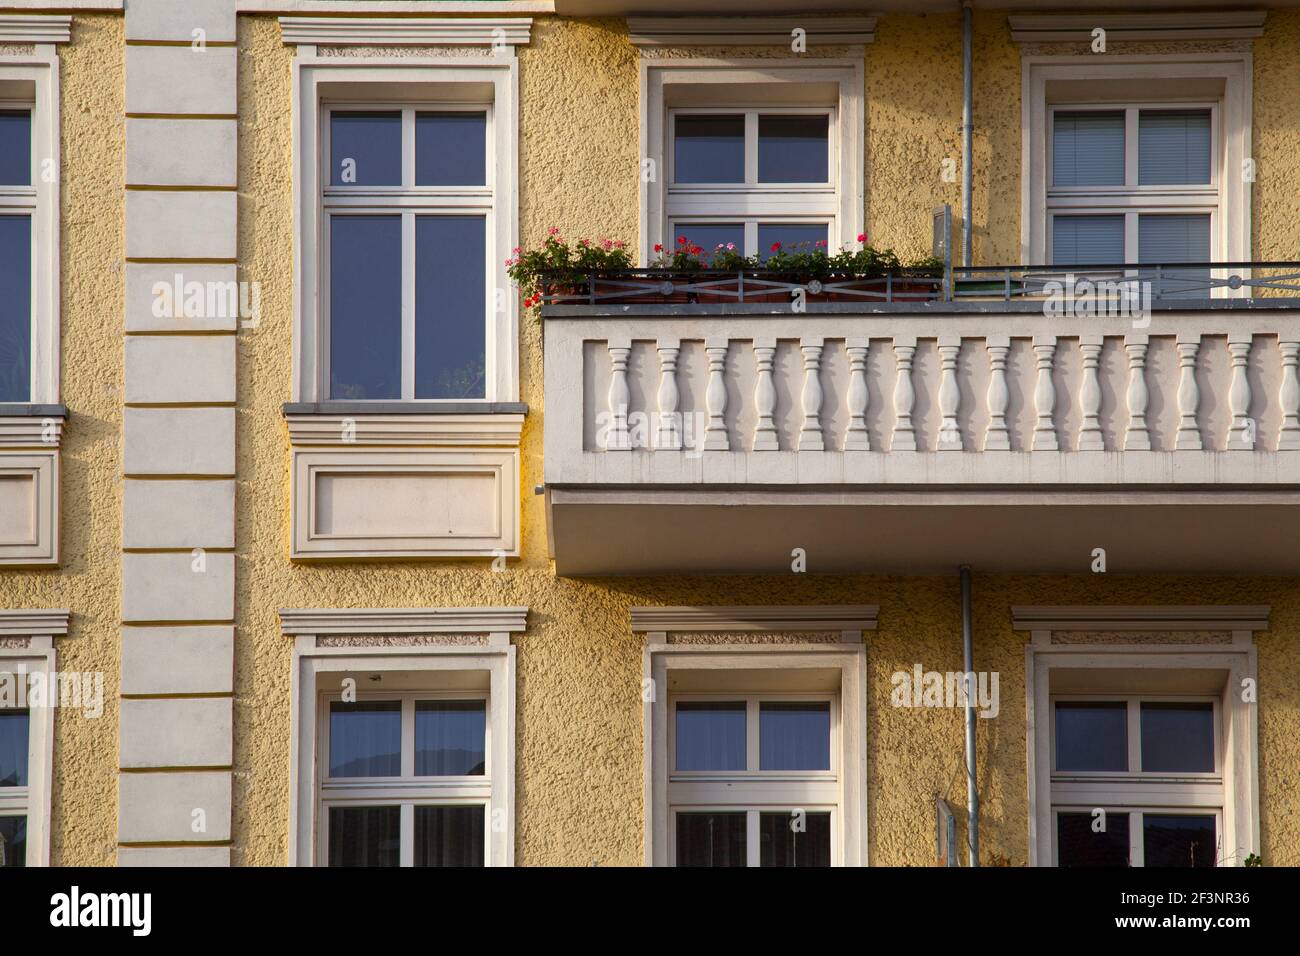 Town houses, historic houses, terraced rental properties in Berlin. City apartment buildings Stock Photo